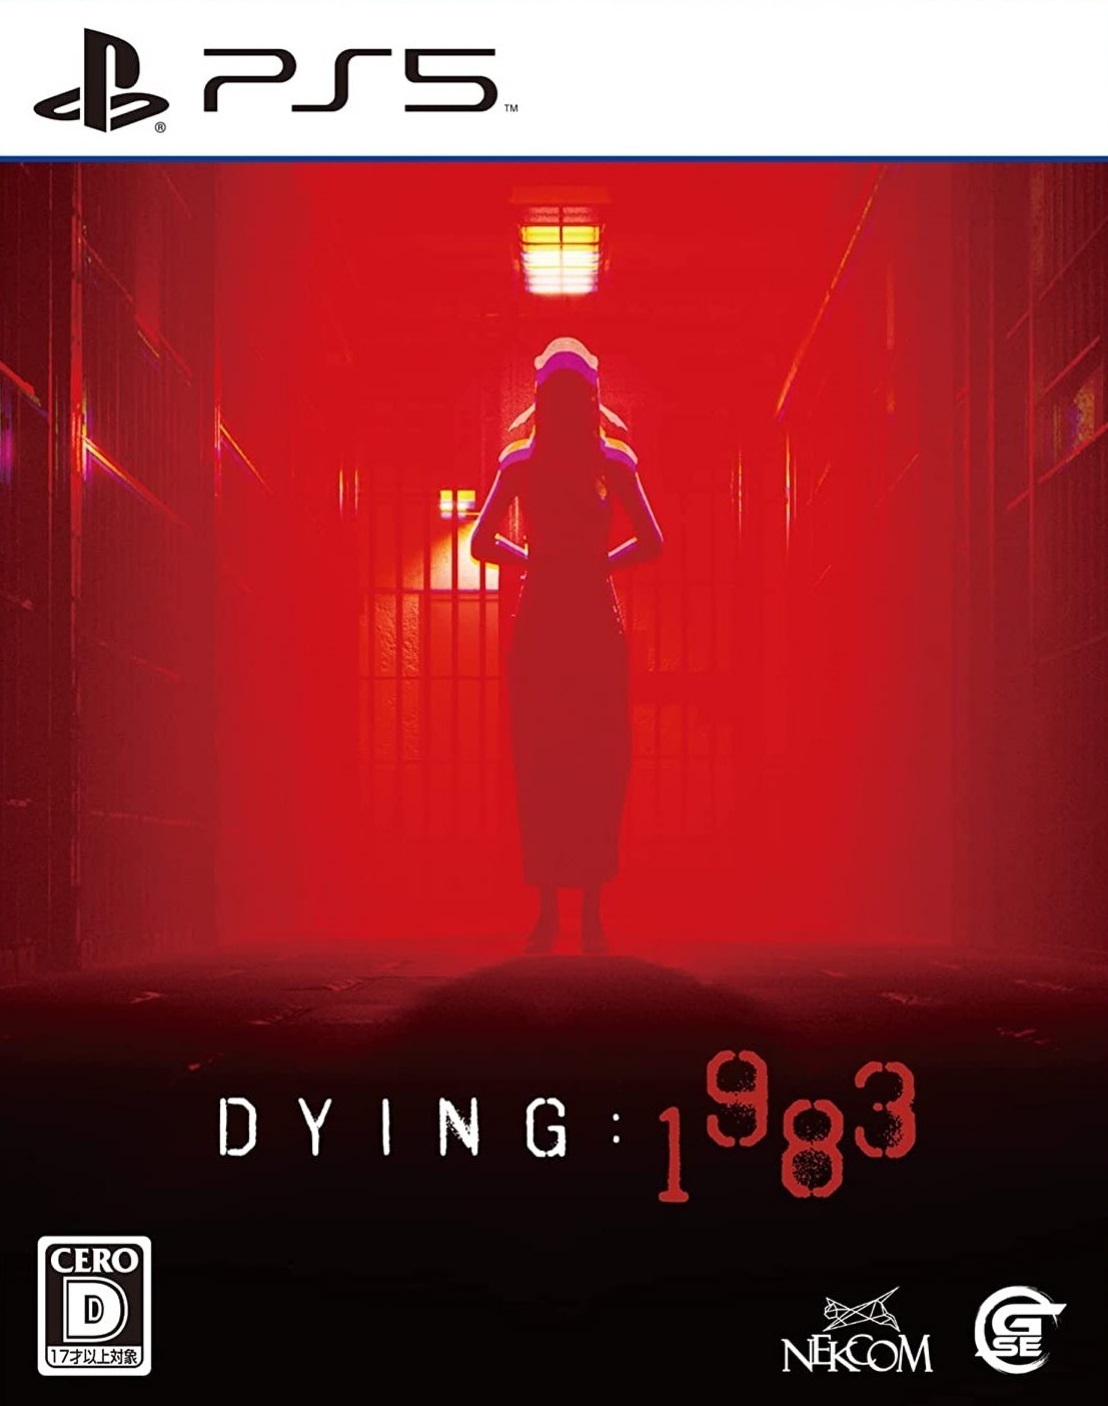 DYING: 1983